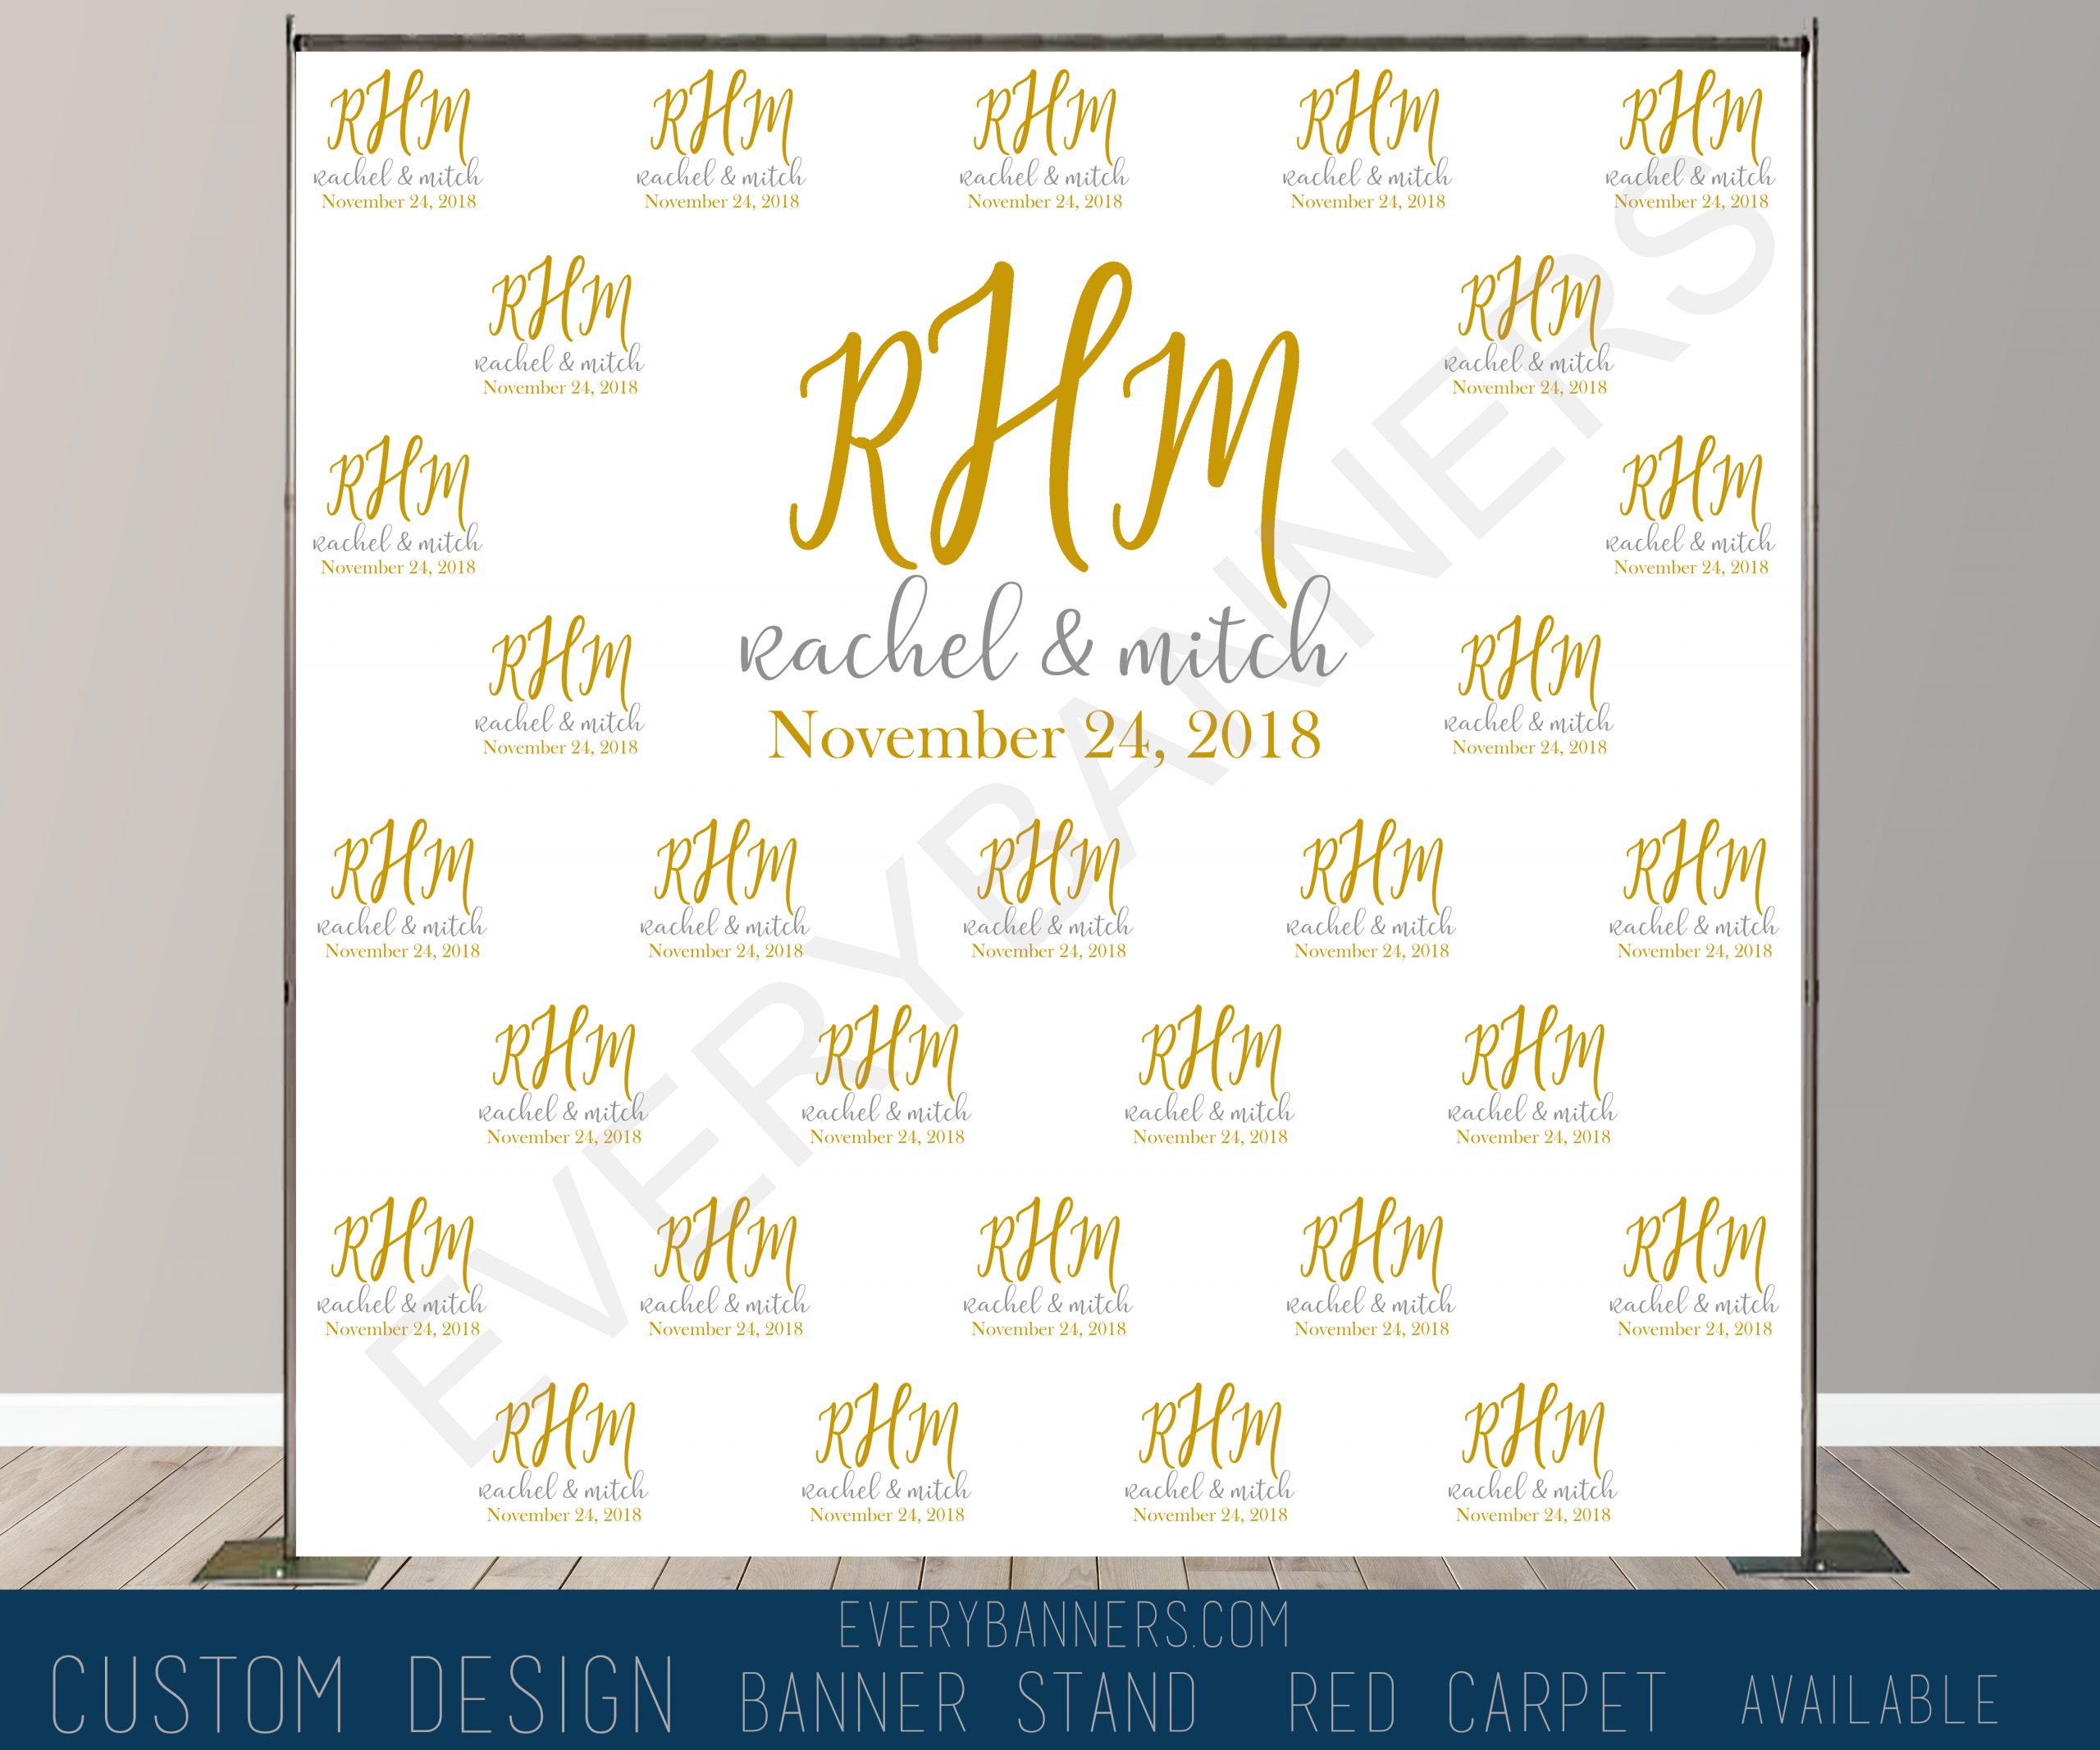 Wedding Step and Repeat Backdrop lowest price at everybanners